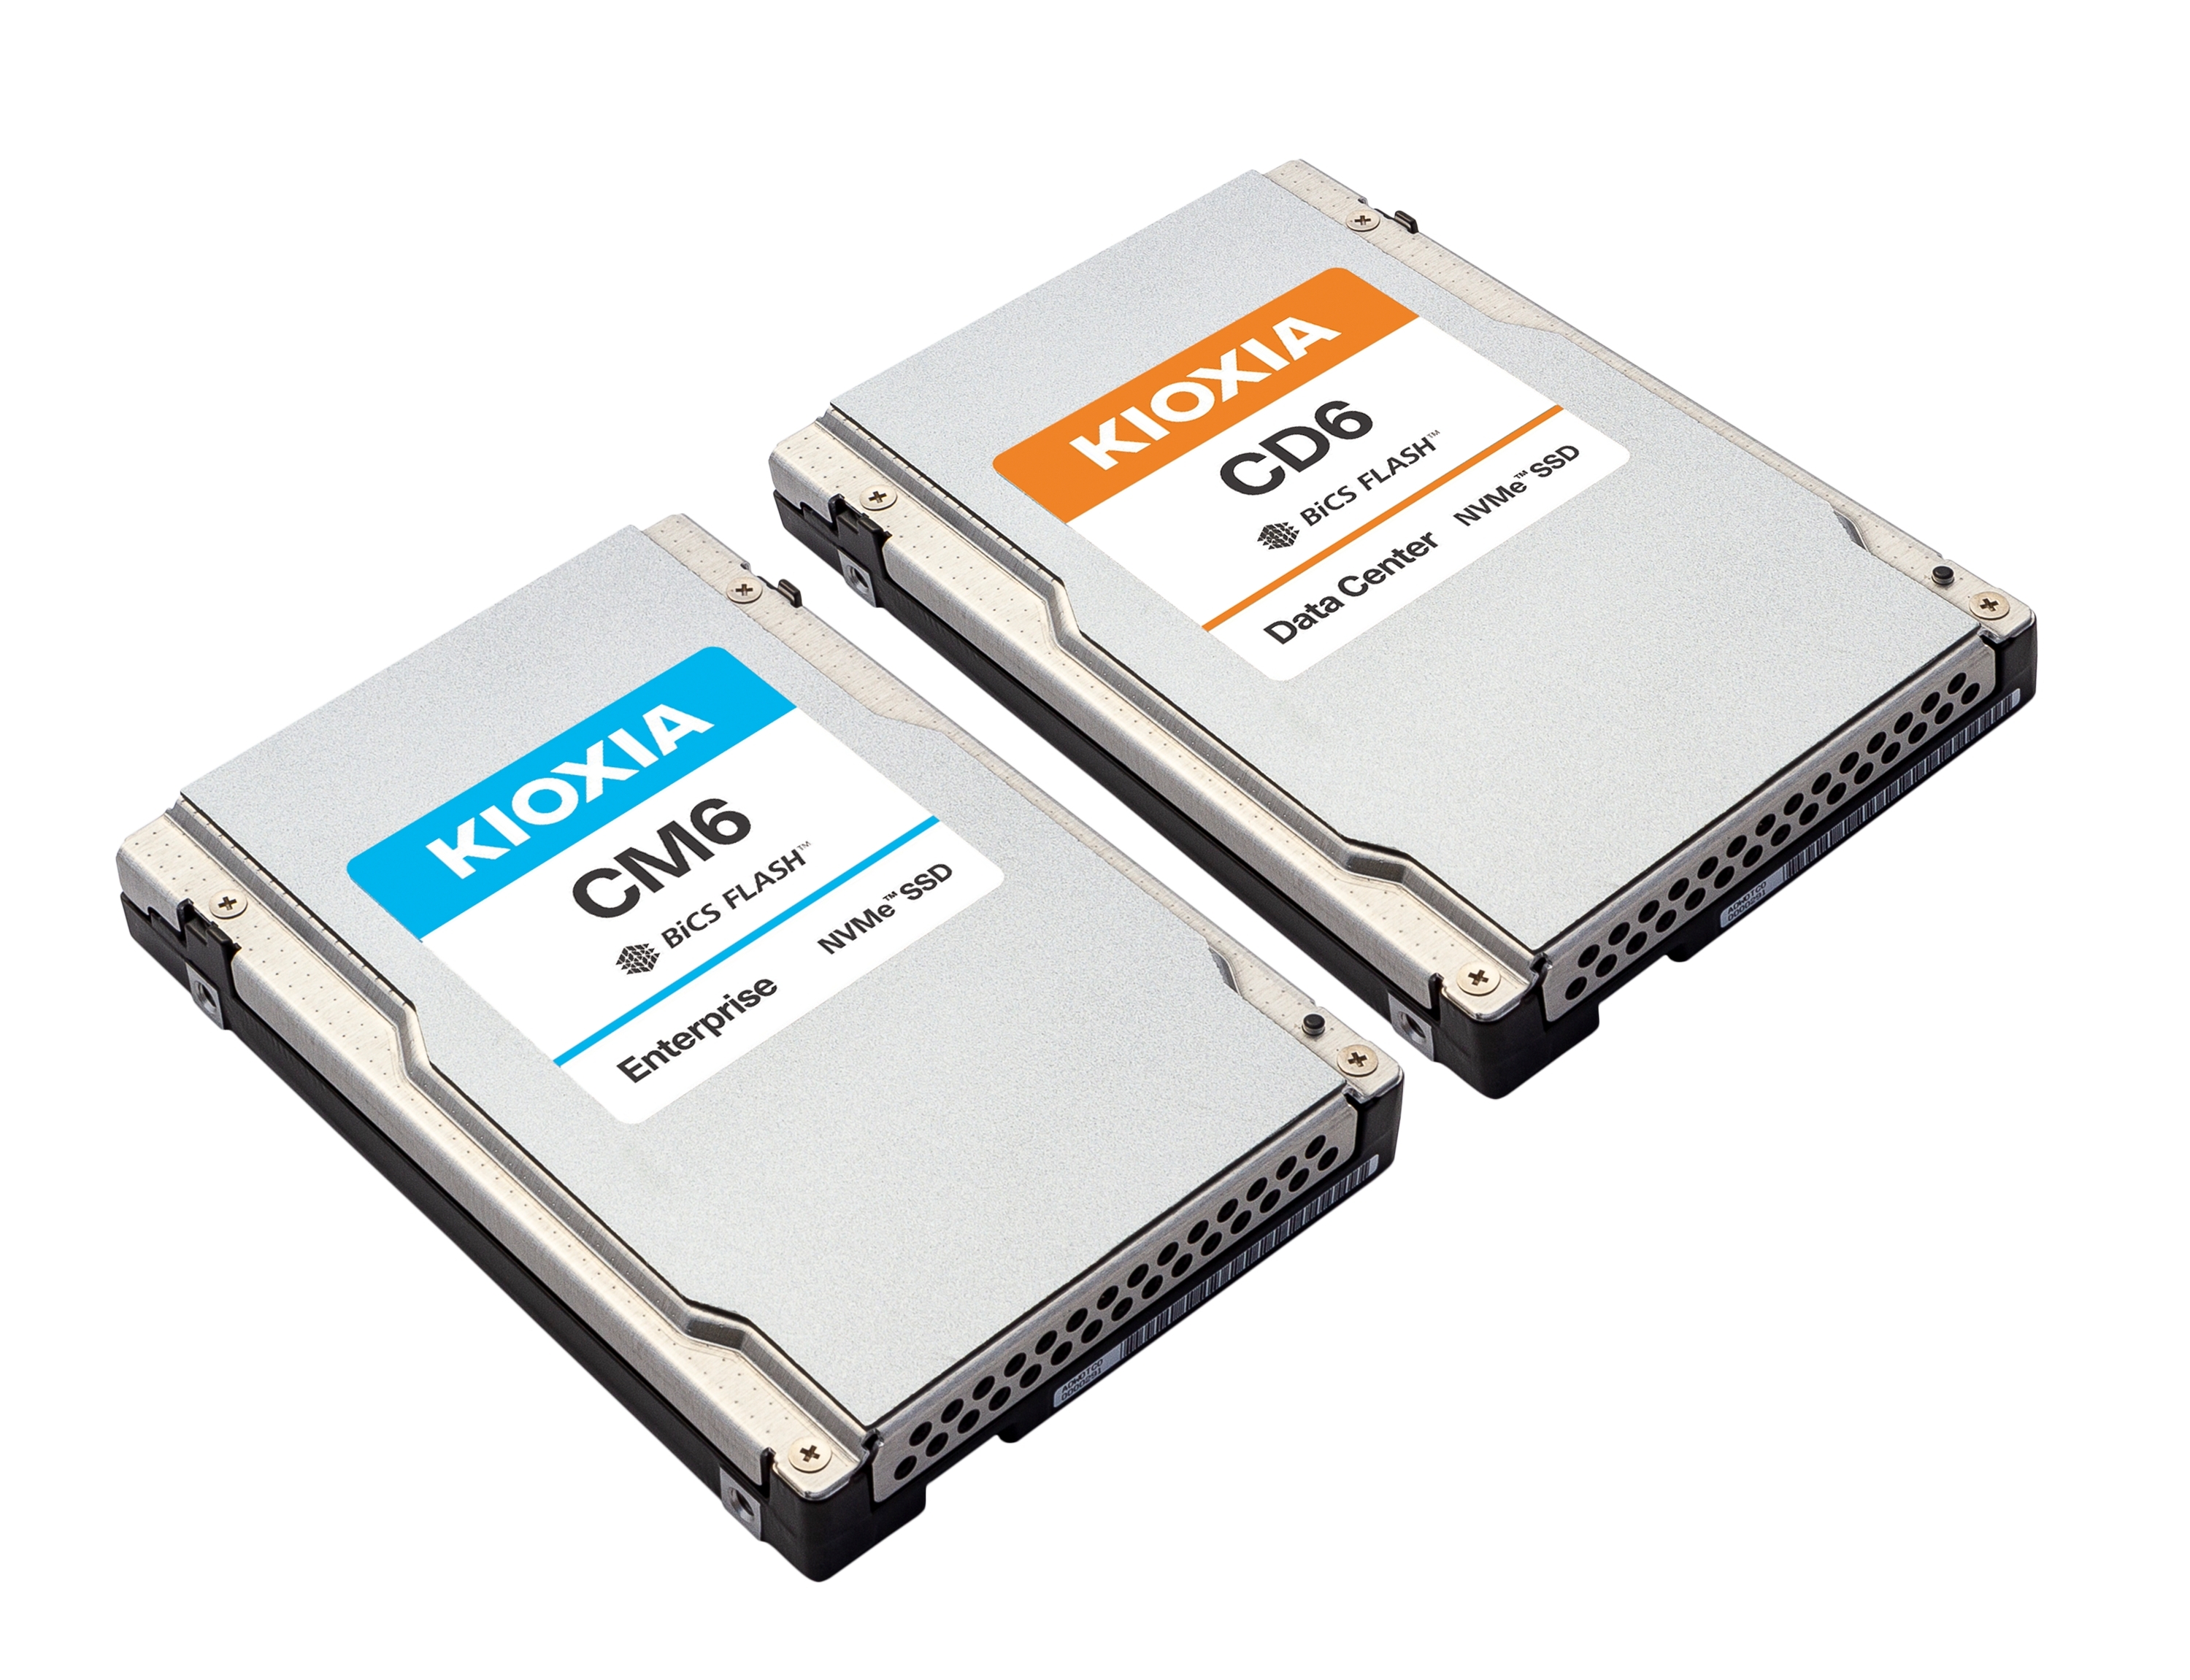 Kioxia Introduces New PCIe<sup>🄬</sup> 5.0 SSDs for Enterprise and Data  Center Infrastructures